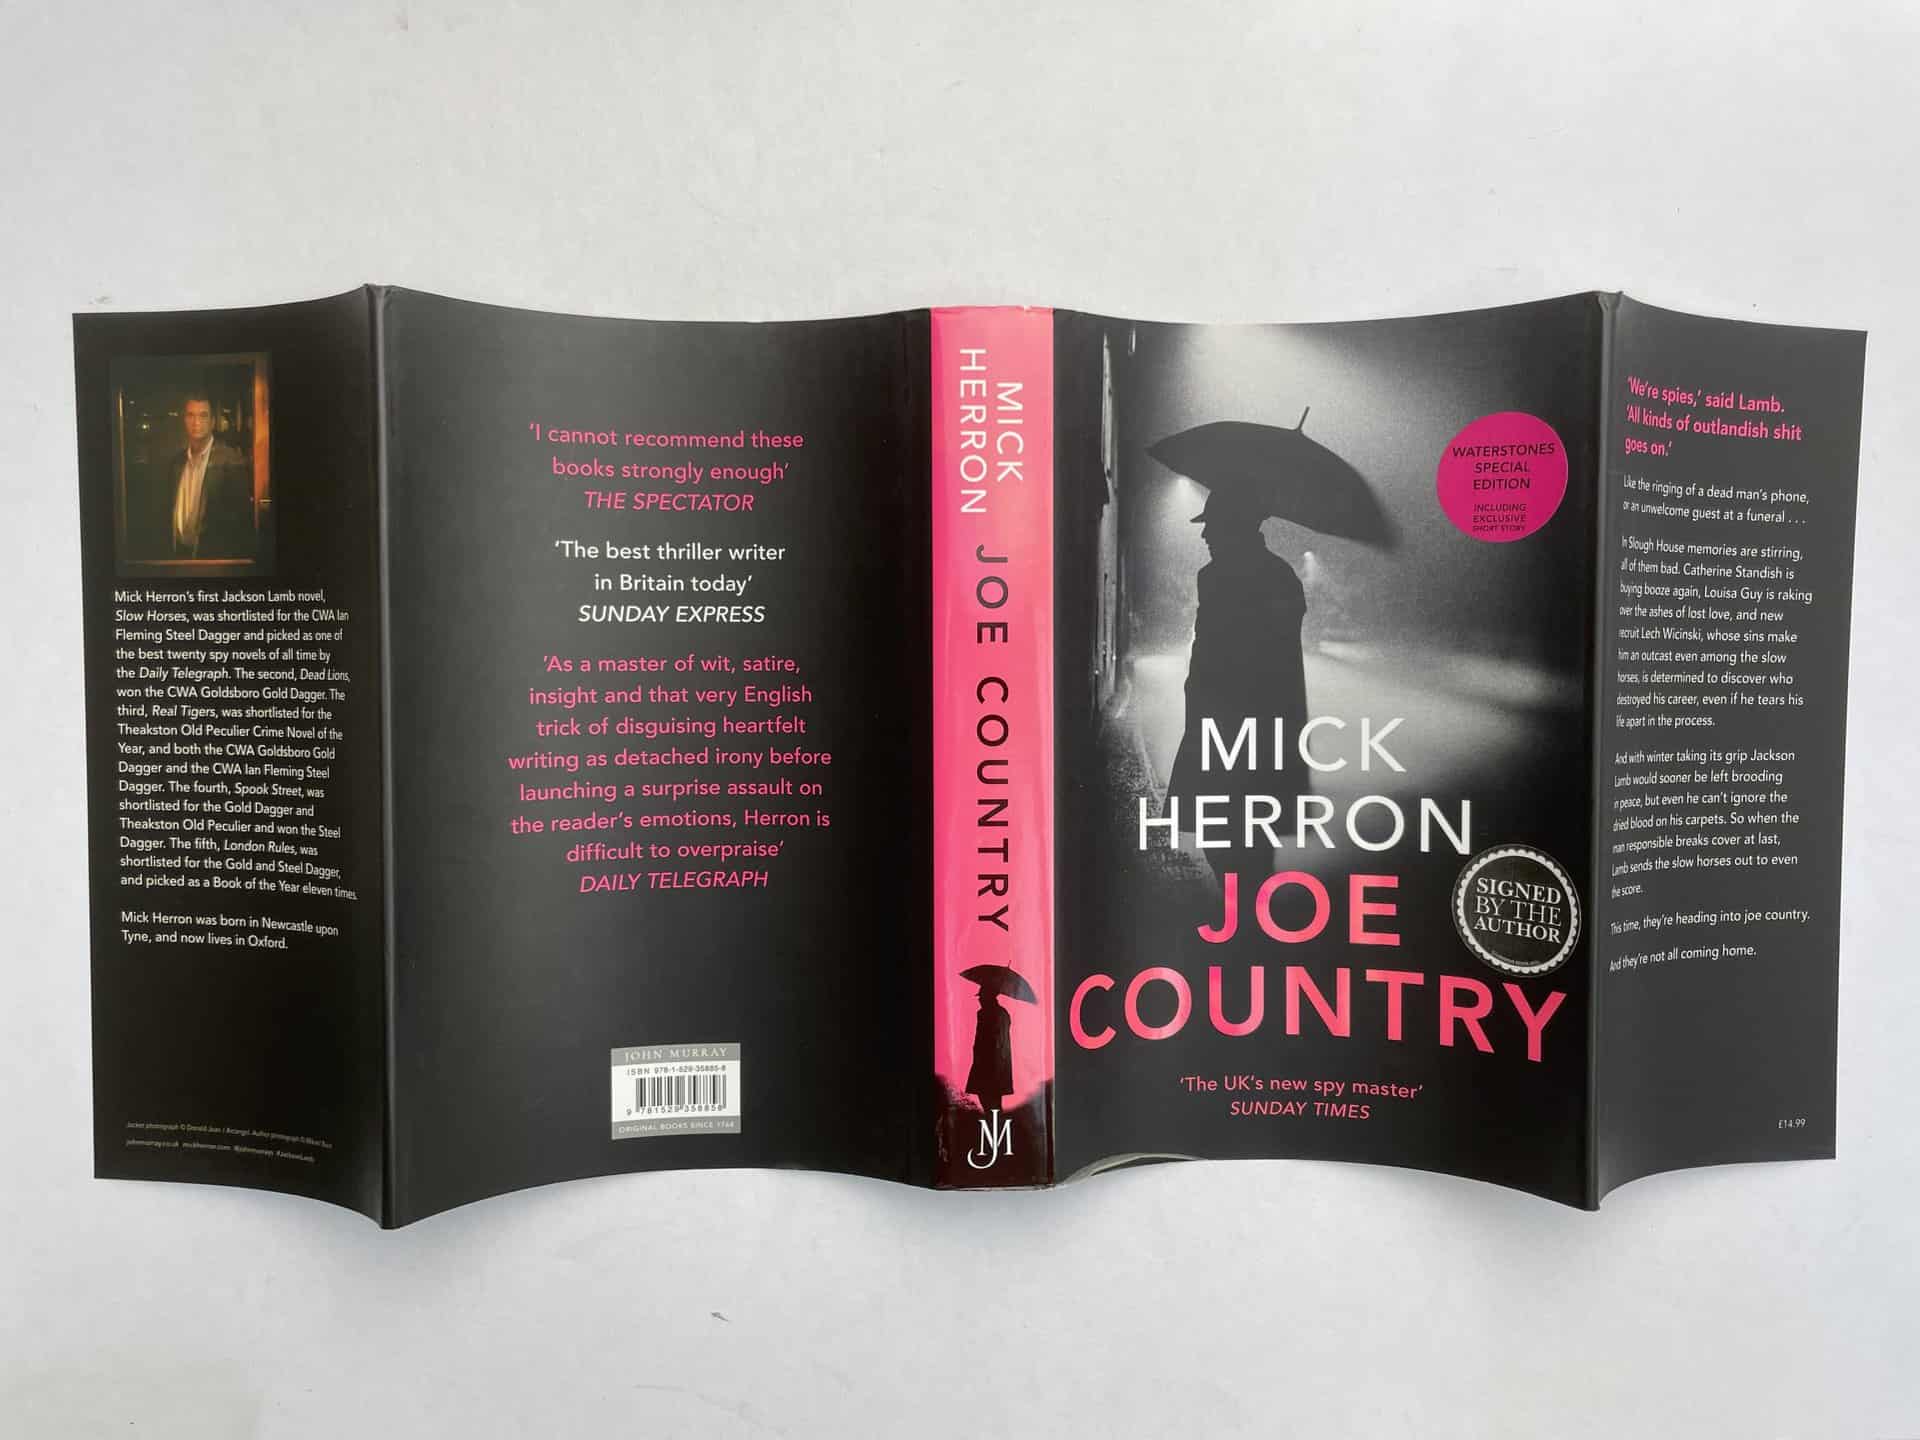 mick herron joe country signed first edition4